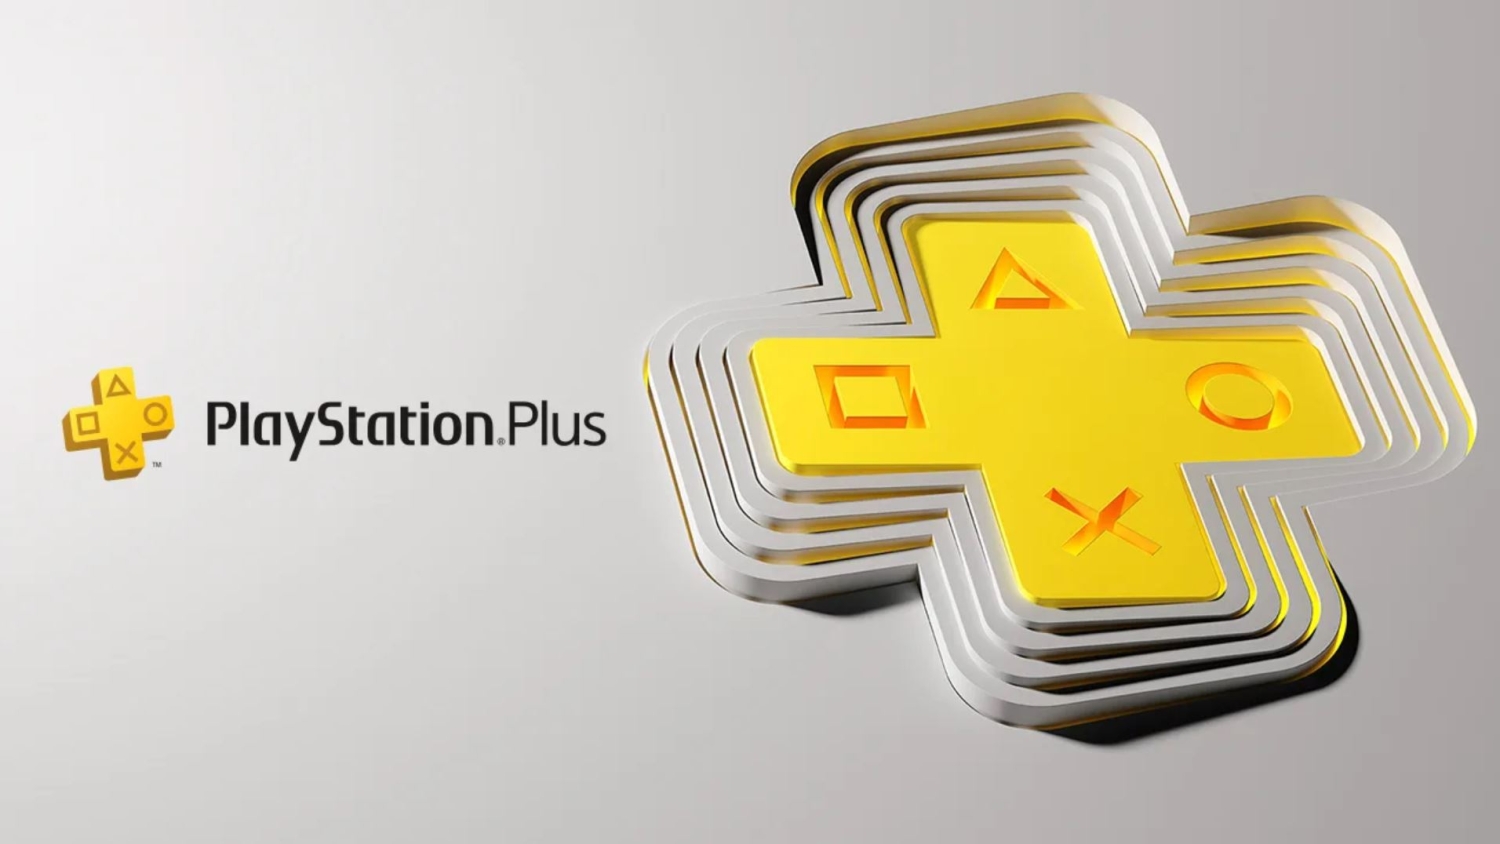 89652_44_sony-tried-to-bring-playstation-plus-xbox-but-microsoft-will-not-permit-it_full.jpg